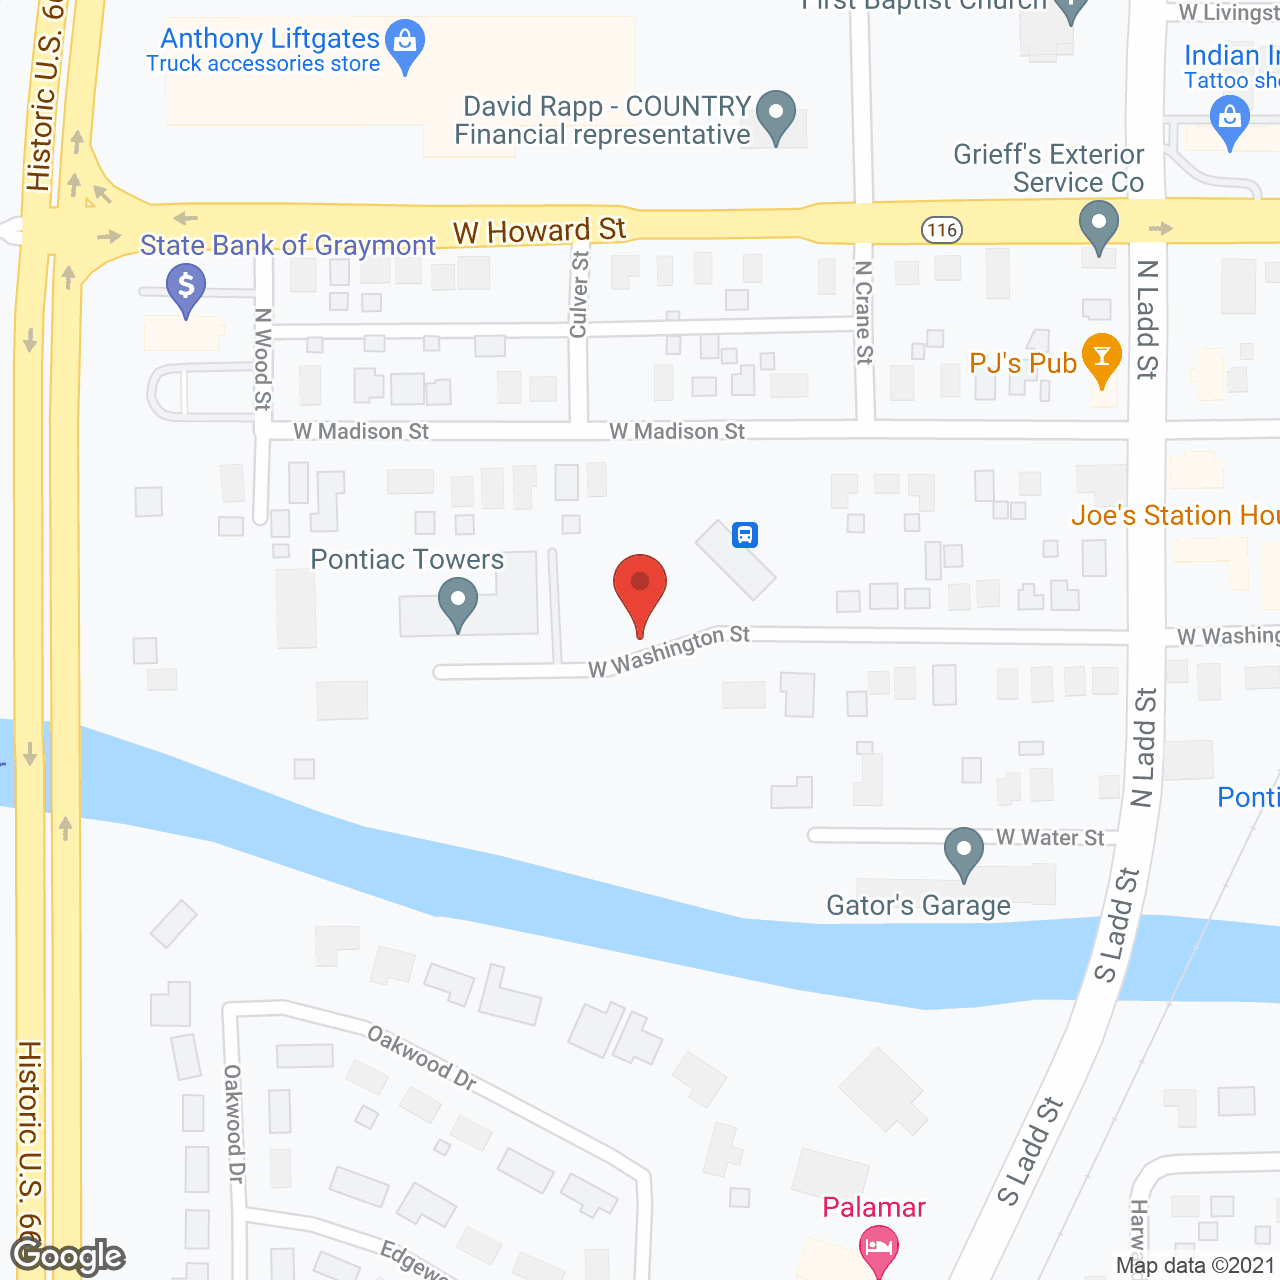 Pontiac Towers in google map